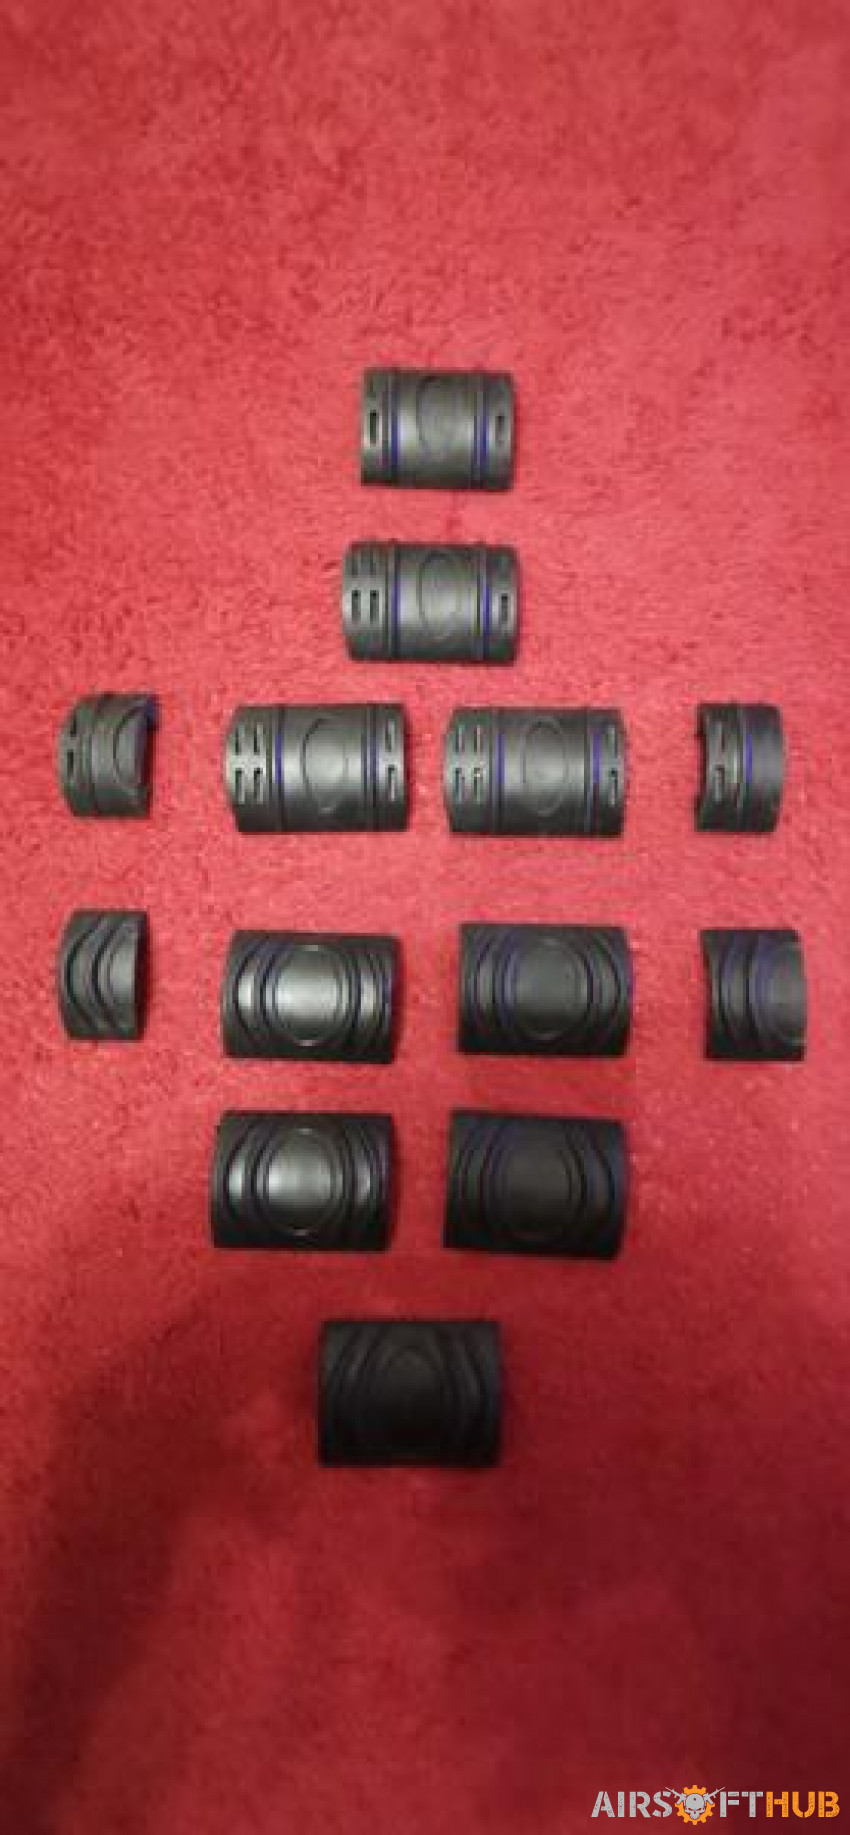 Airsoft Accessories Clearout - Used airsoft equipment